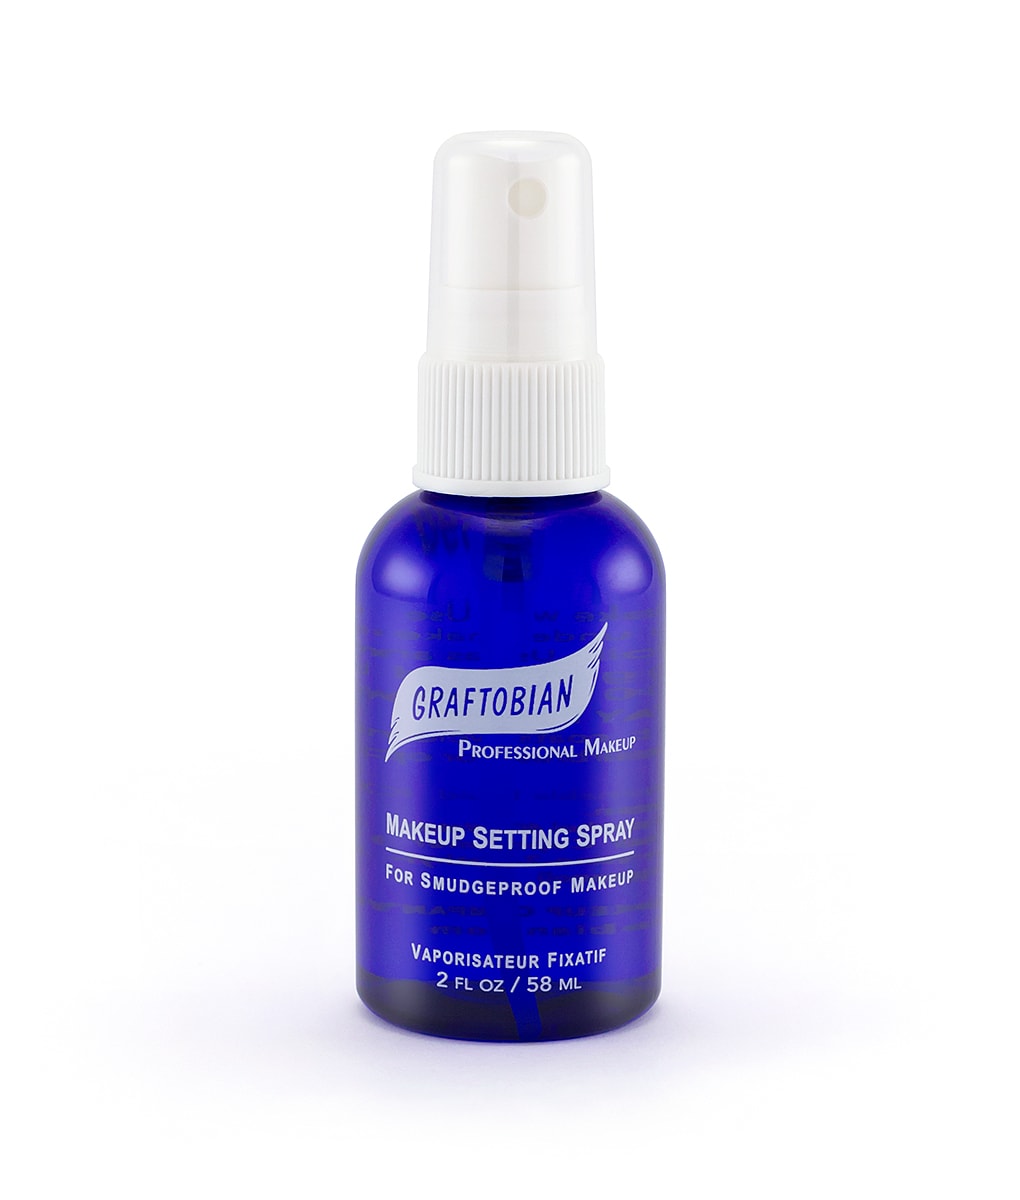 Airbrush Cleansing Fluid – Graftobian Make-Up Company